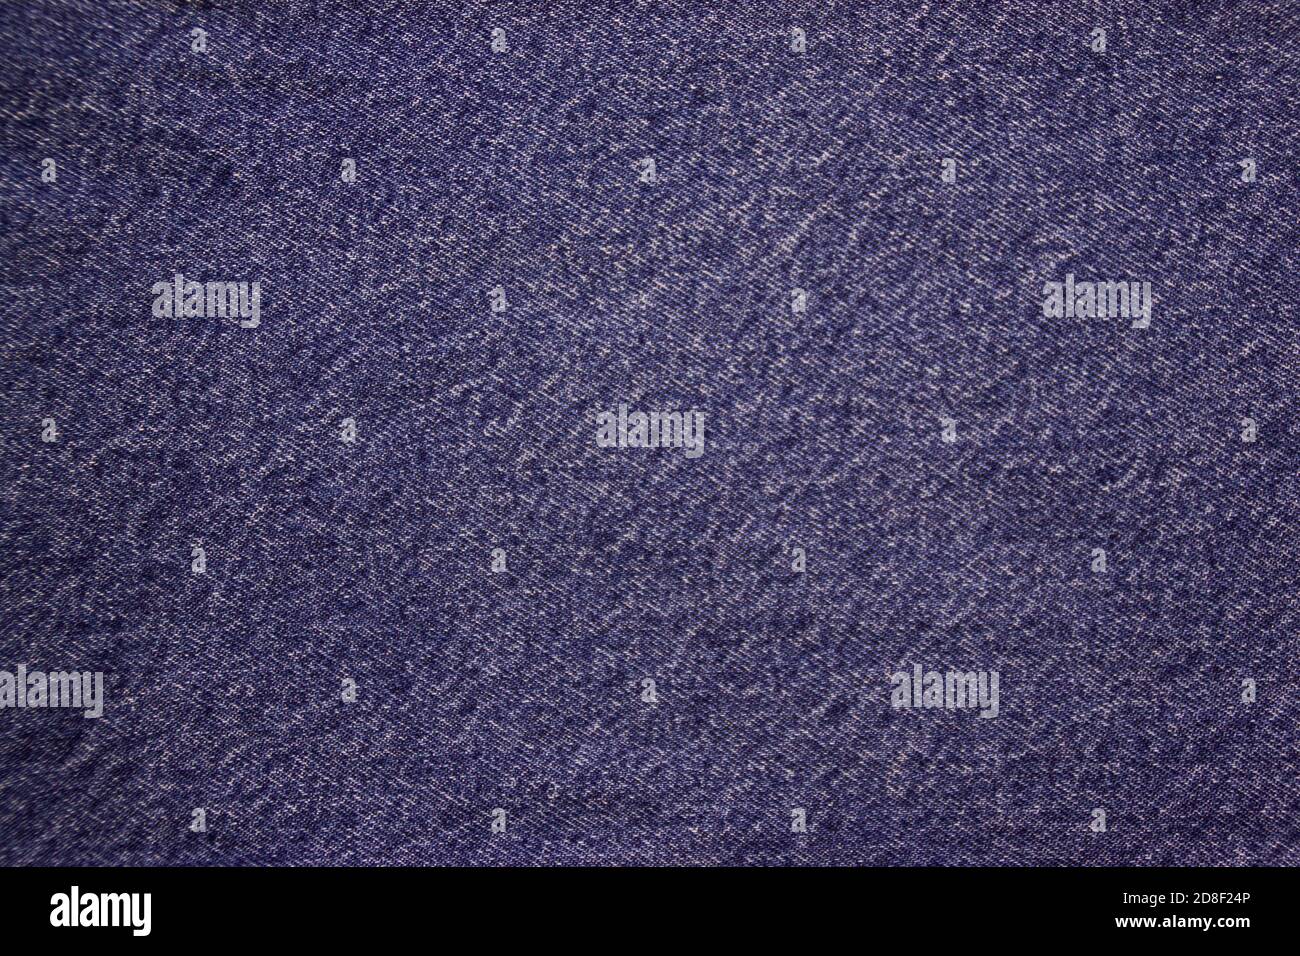 jeans fabric denim texture background. closeup. high quality denim. rough cotton jeans fabric. denim material. denim fabric for casual clothes, natural material for working clothes Stock Photo